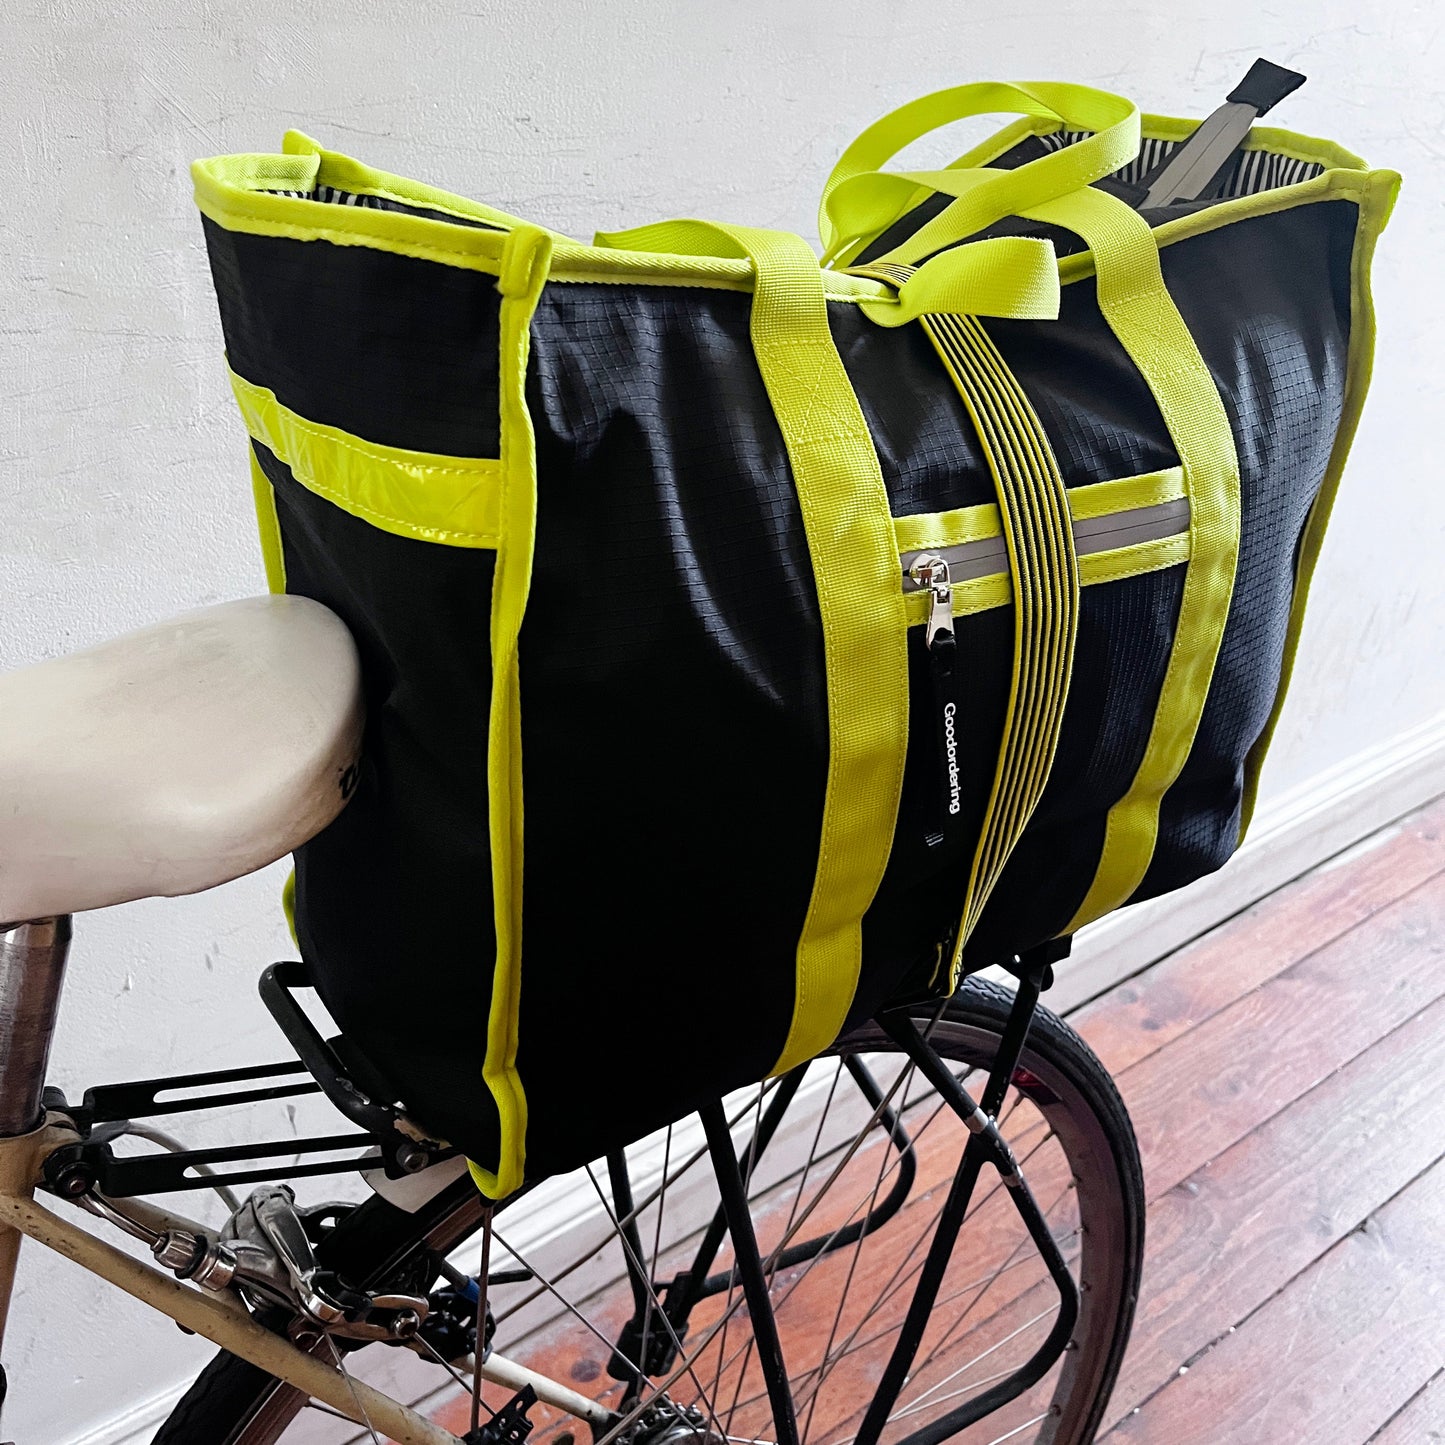 Neon tote backpack pannier with Kompakt rail hardware